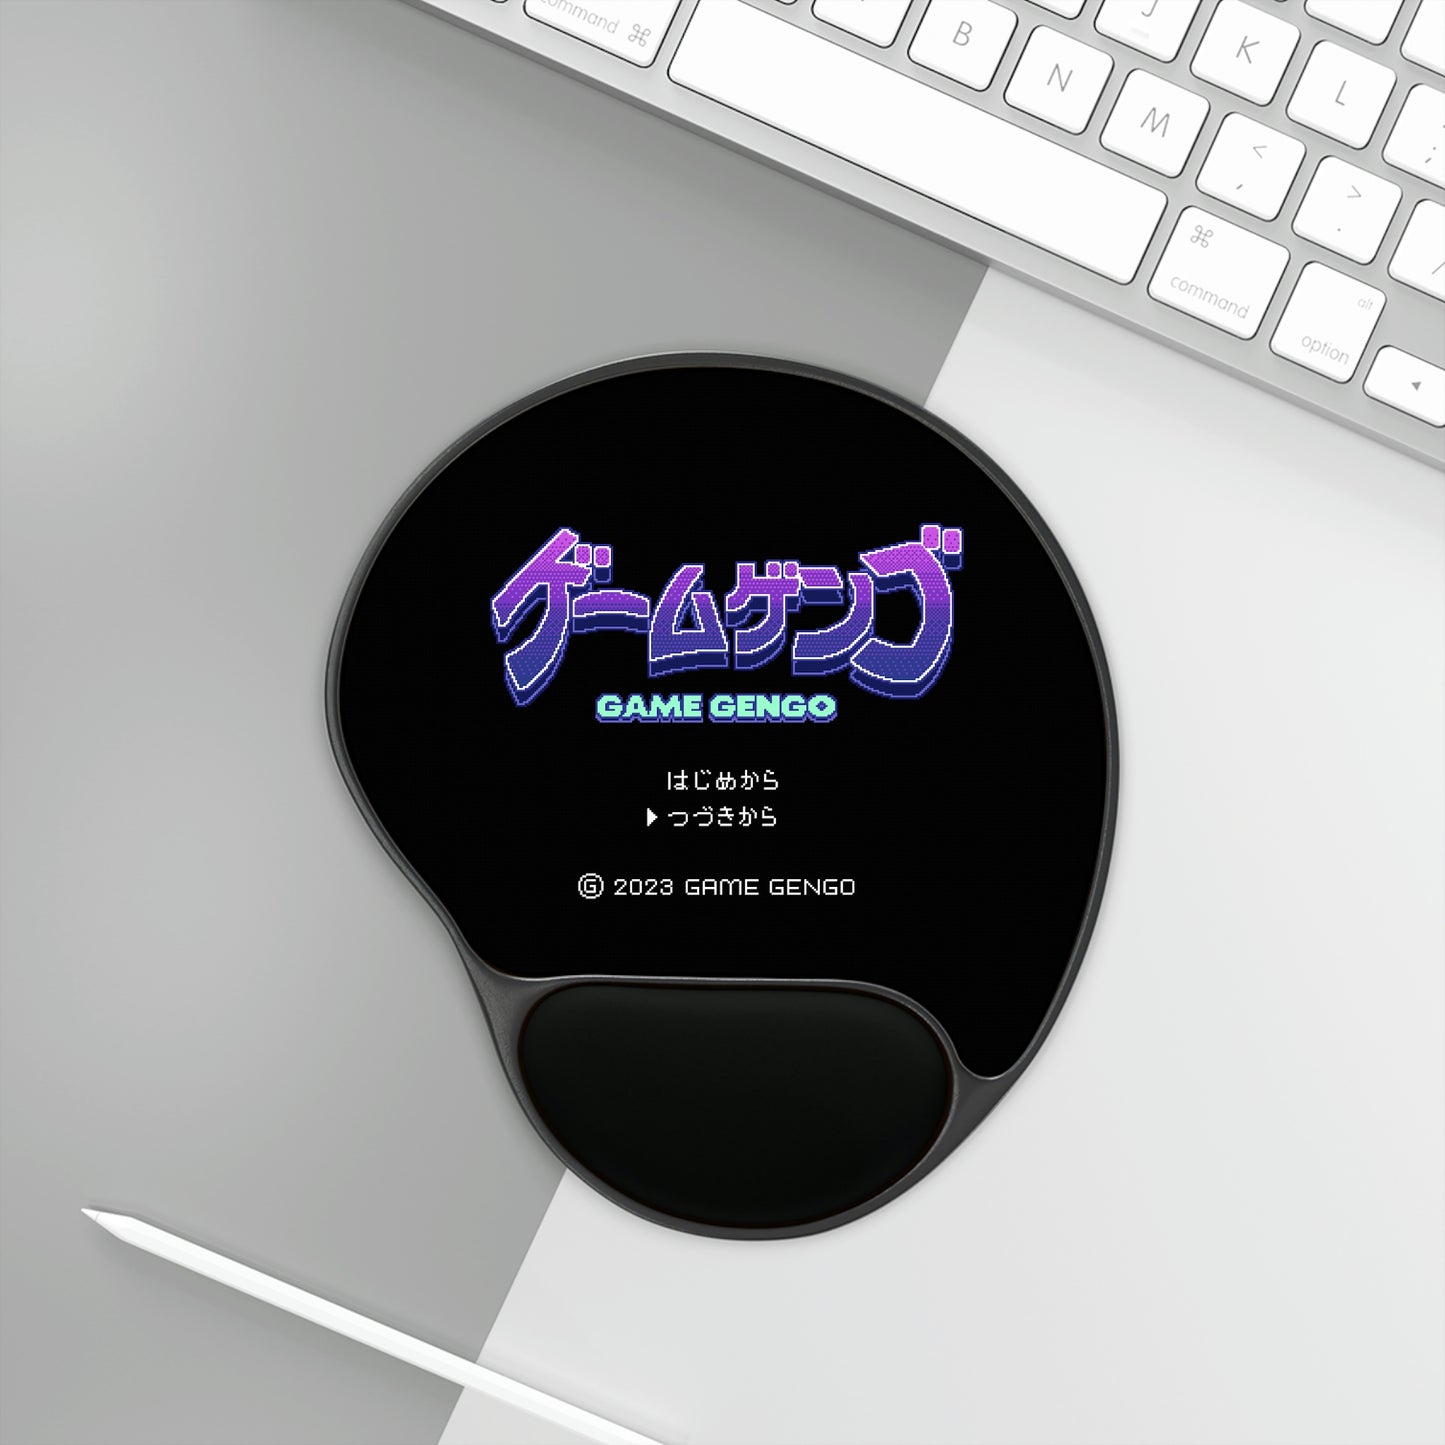 Violet Vibes Mouse Pad With Wrist Rest